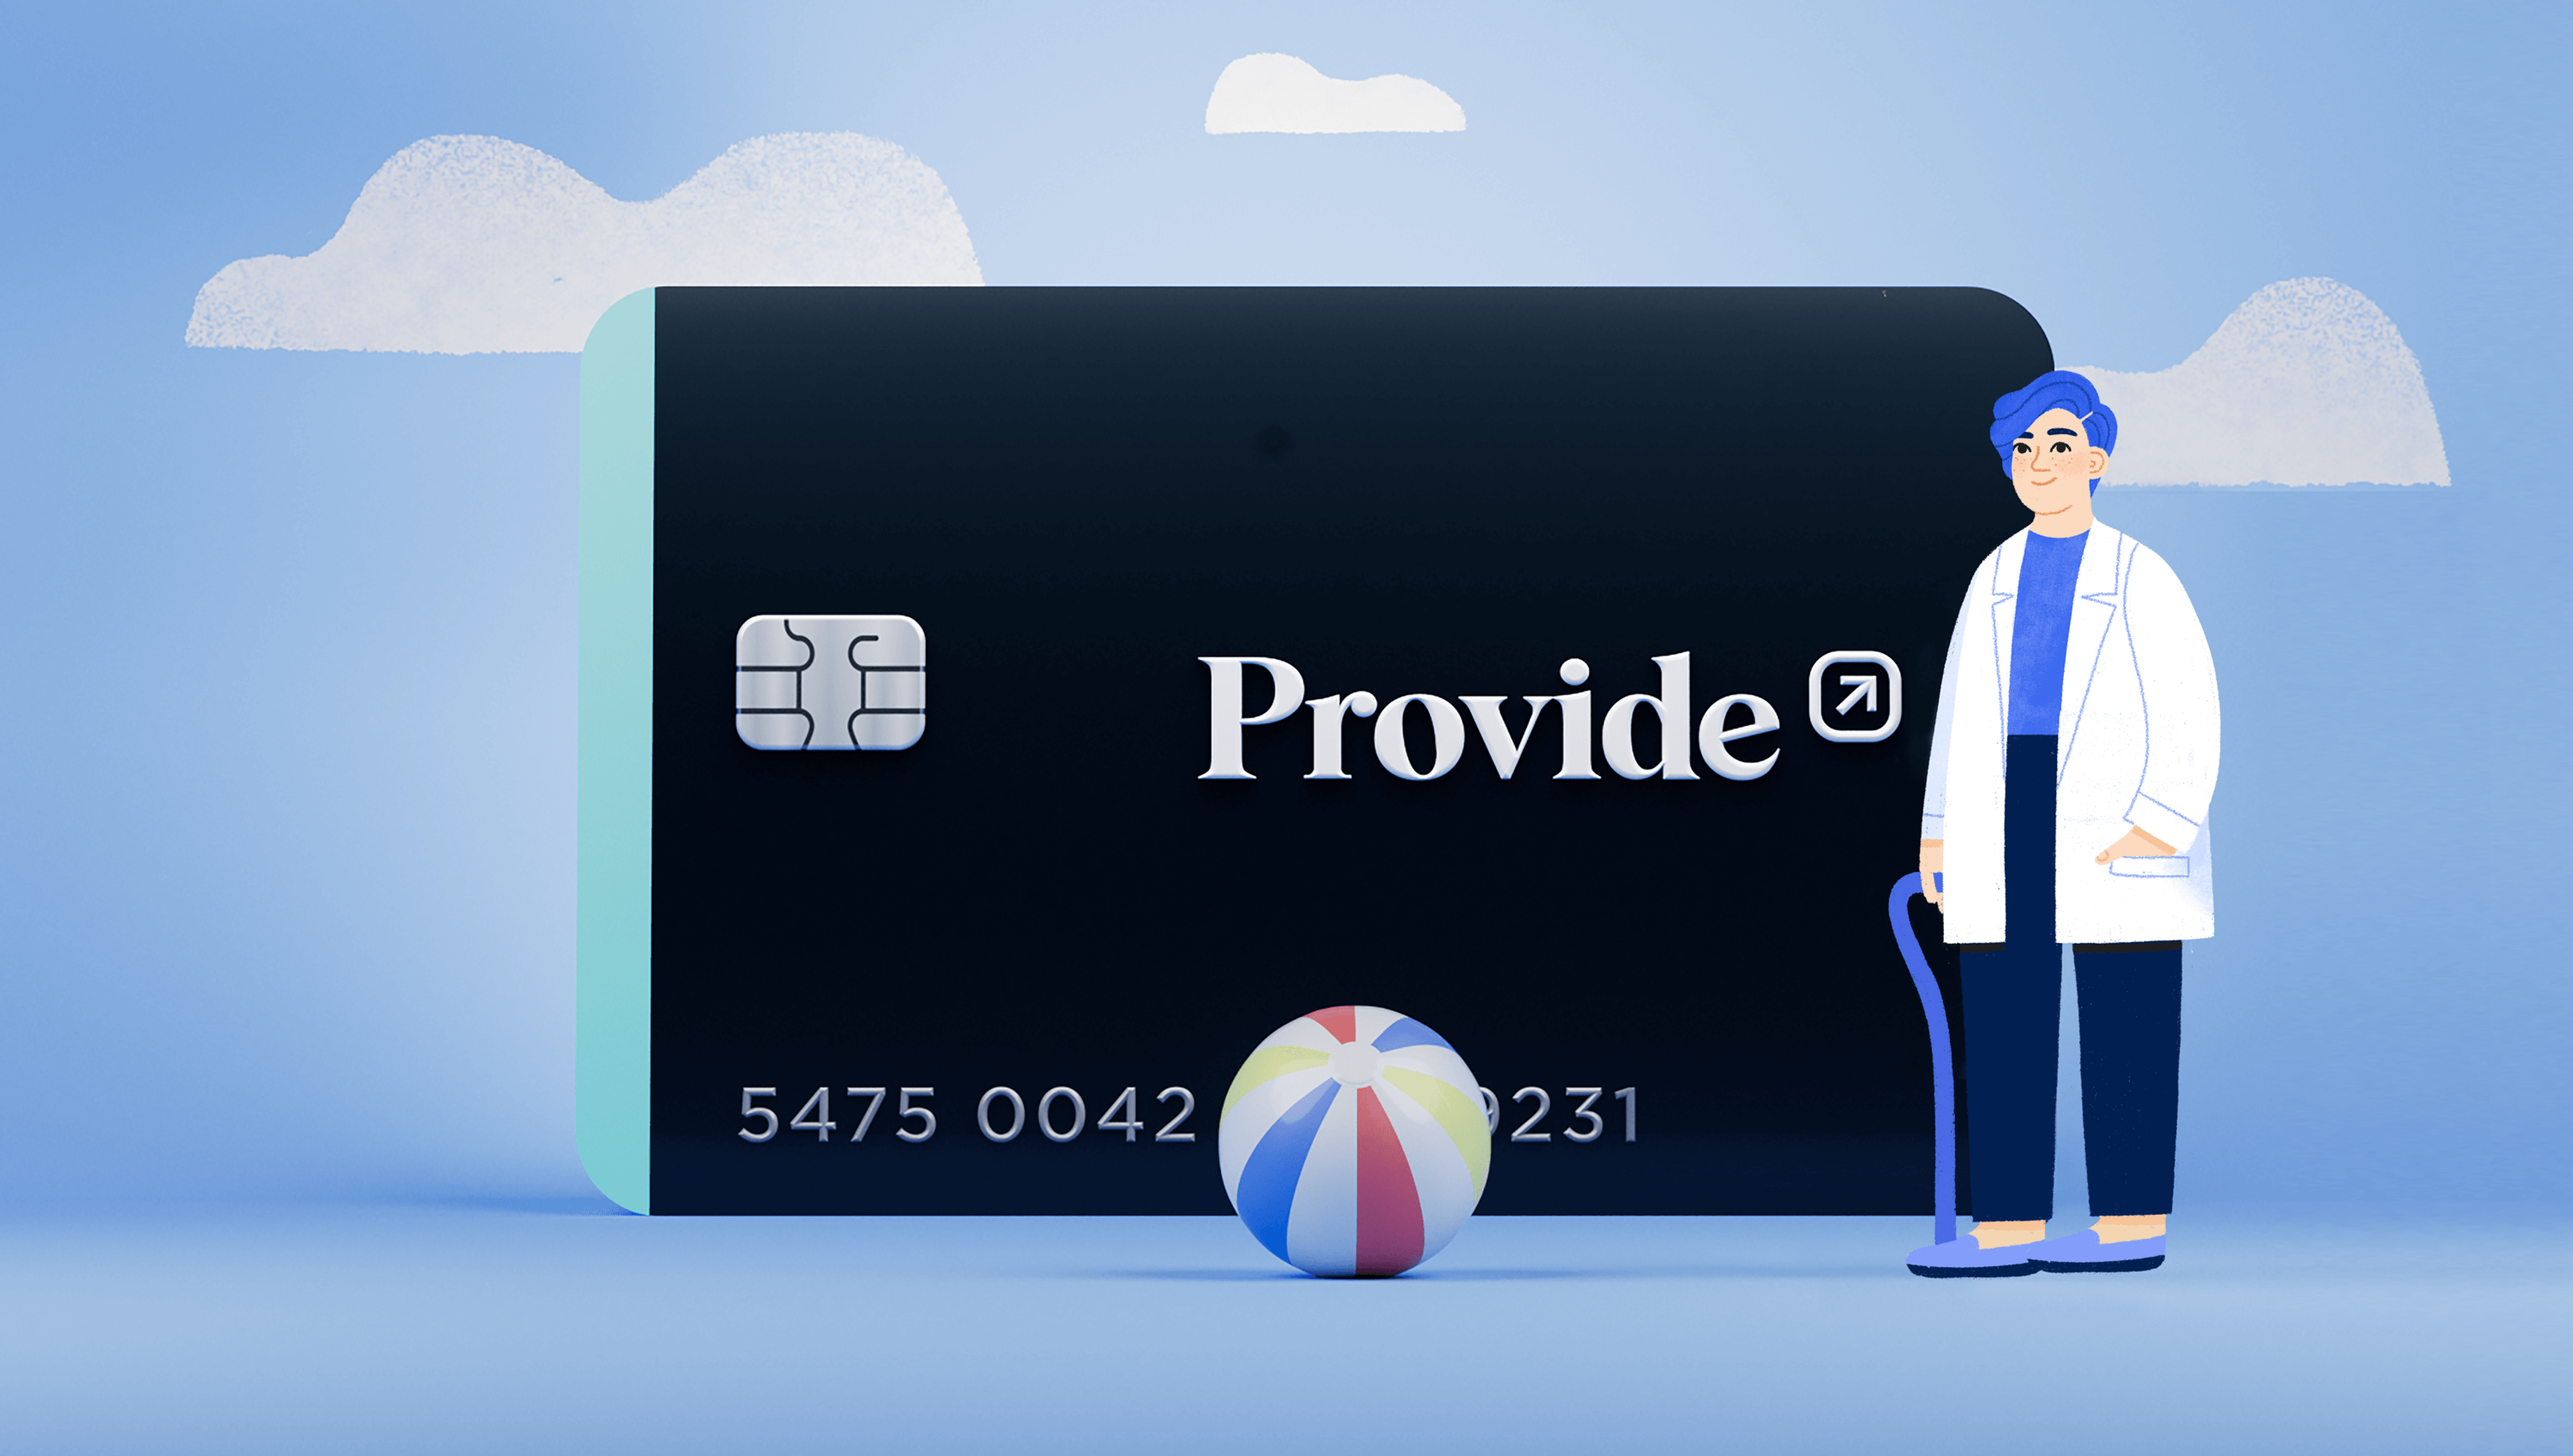 Provide Card cover image